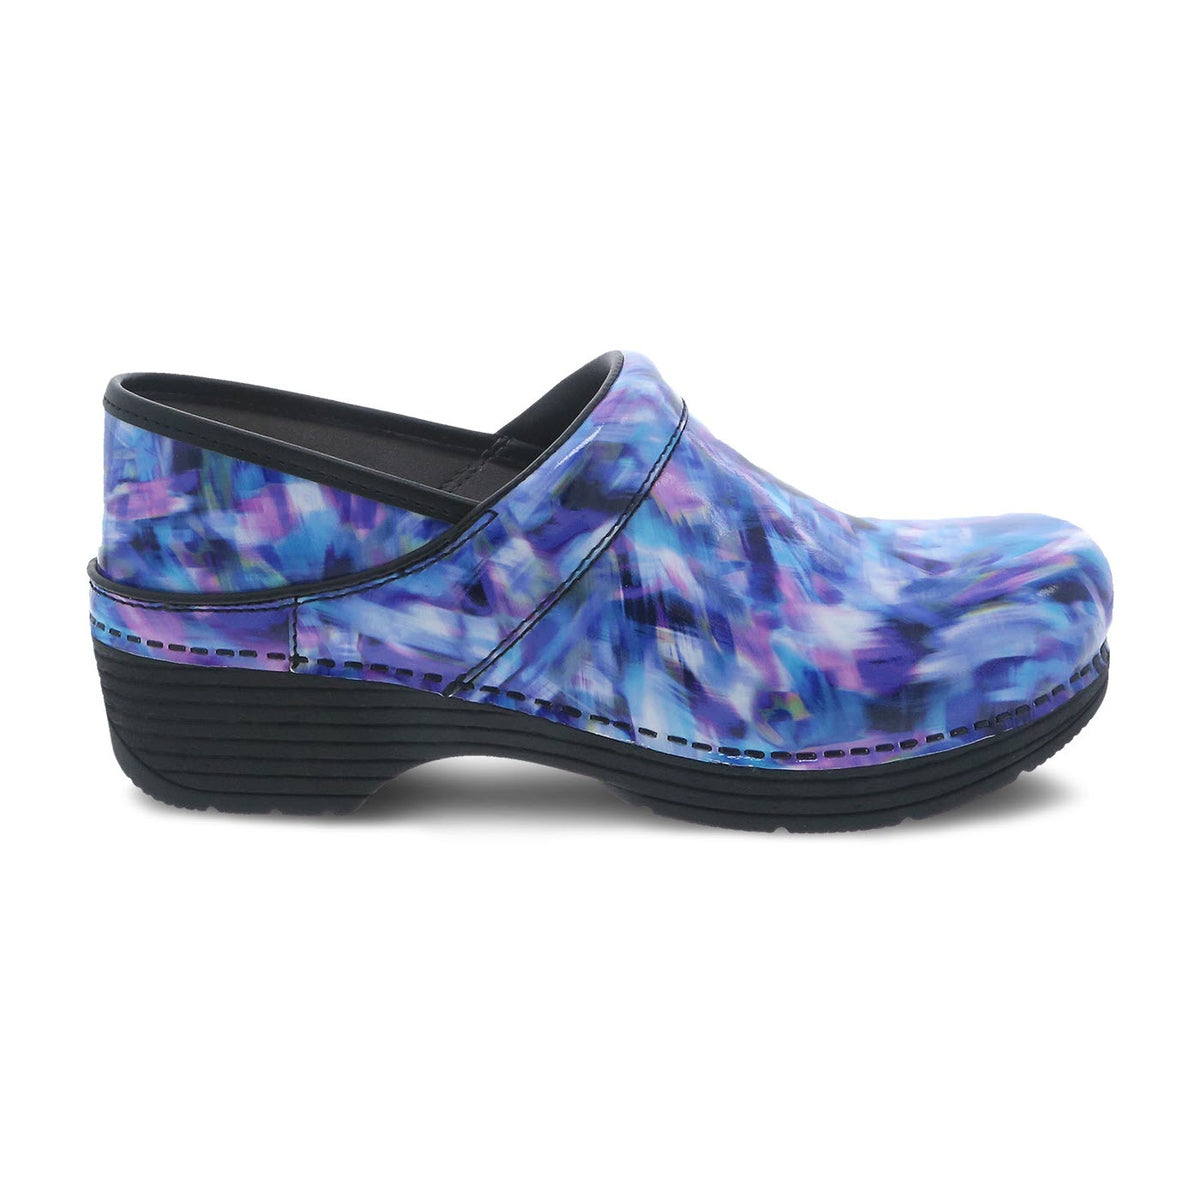 A single Dansko women&#39;s clog with a blue and purple swirled pattern on a white background features lightweight construction.